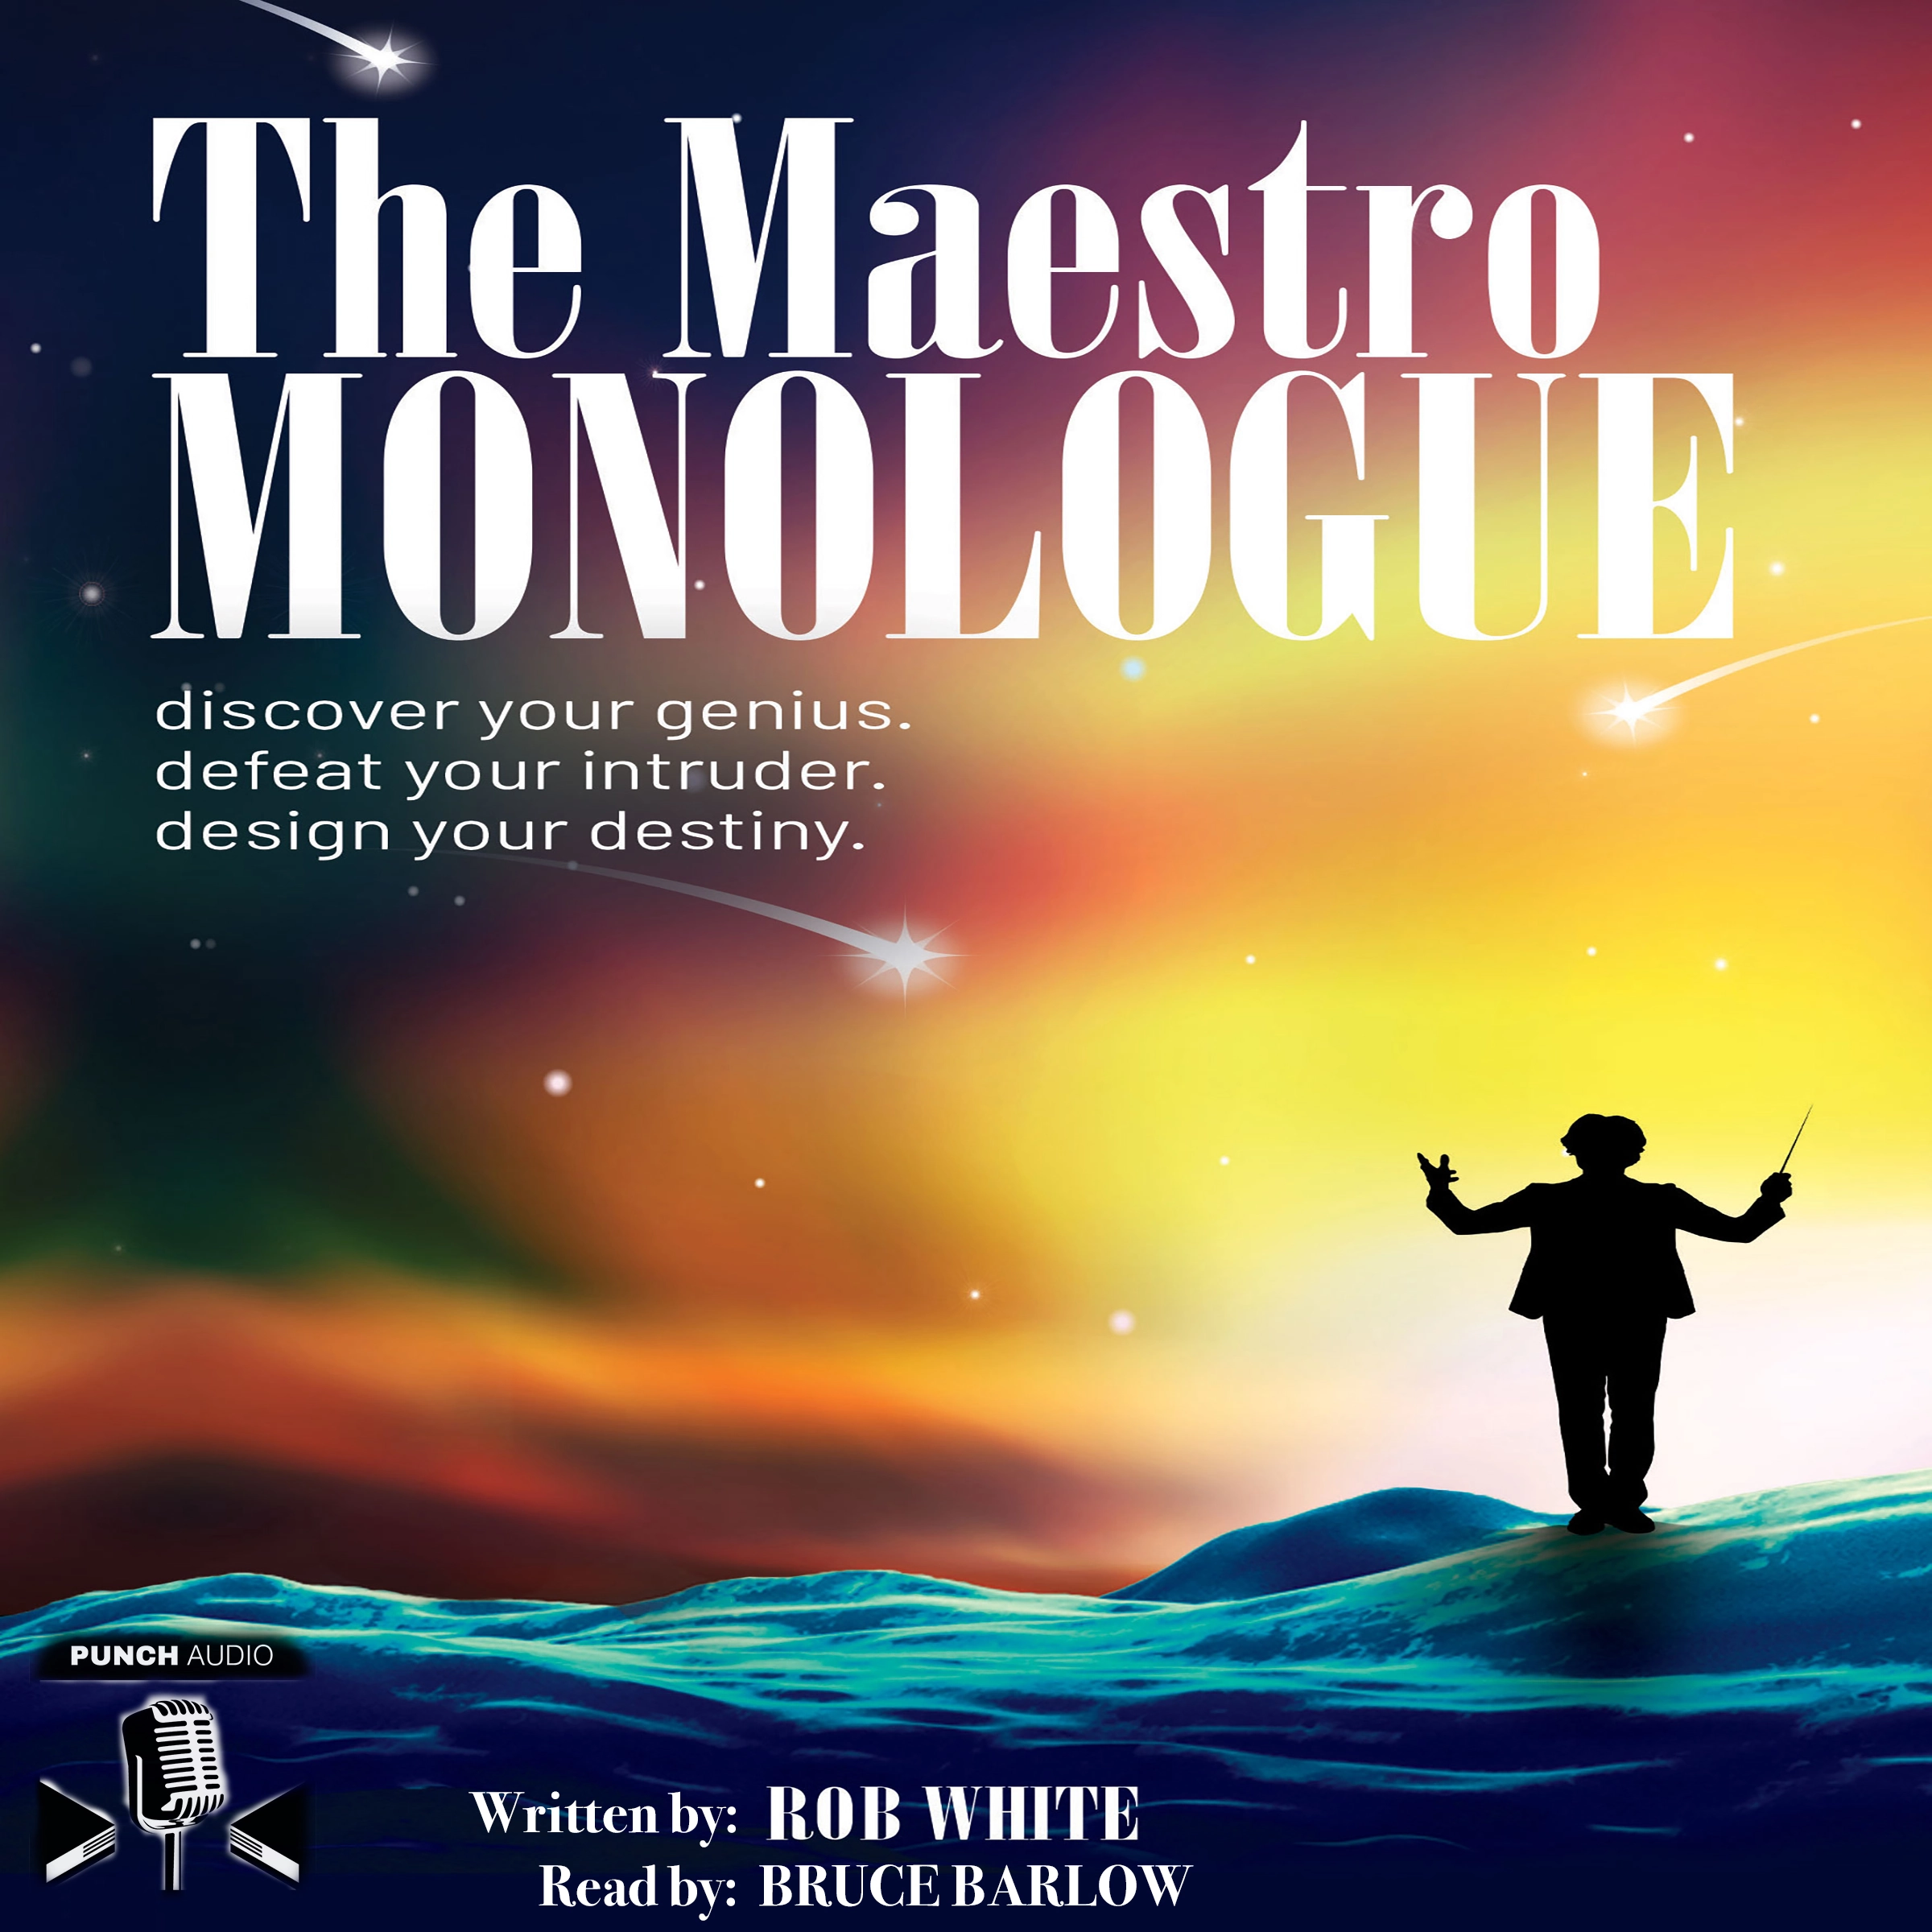 The Maestro Monologue by Rob White Audiobook